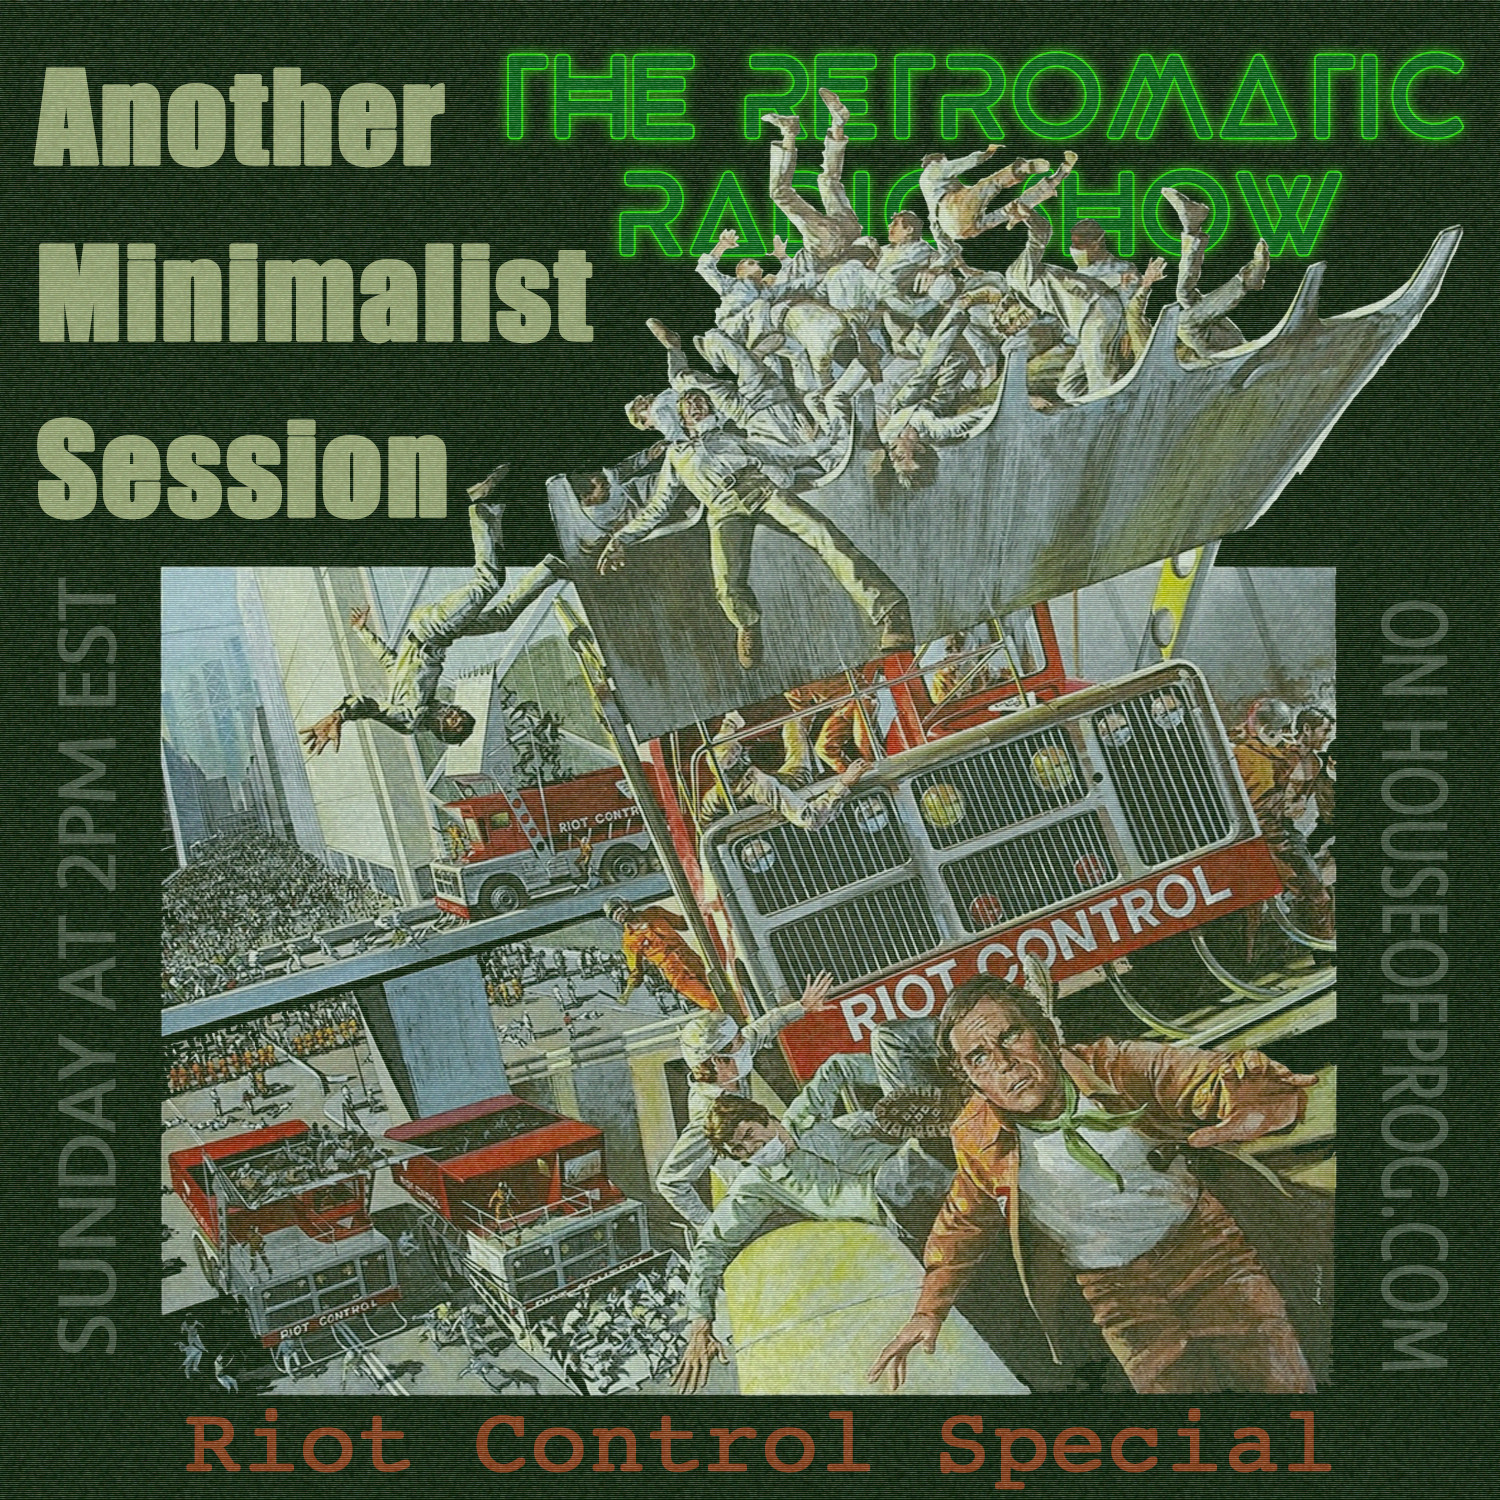 Episode 14 – Another Minimalist Session – The Riot Control Special